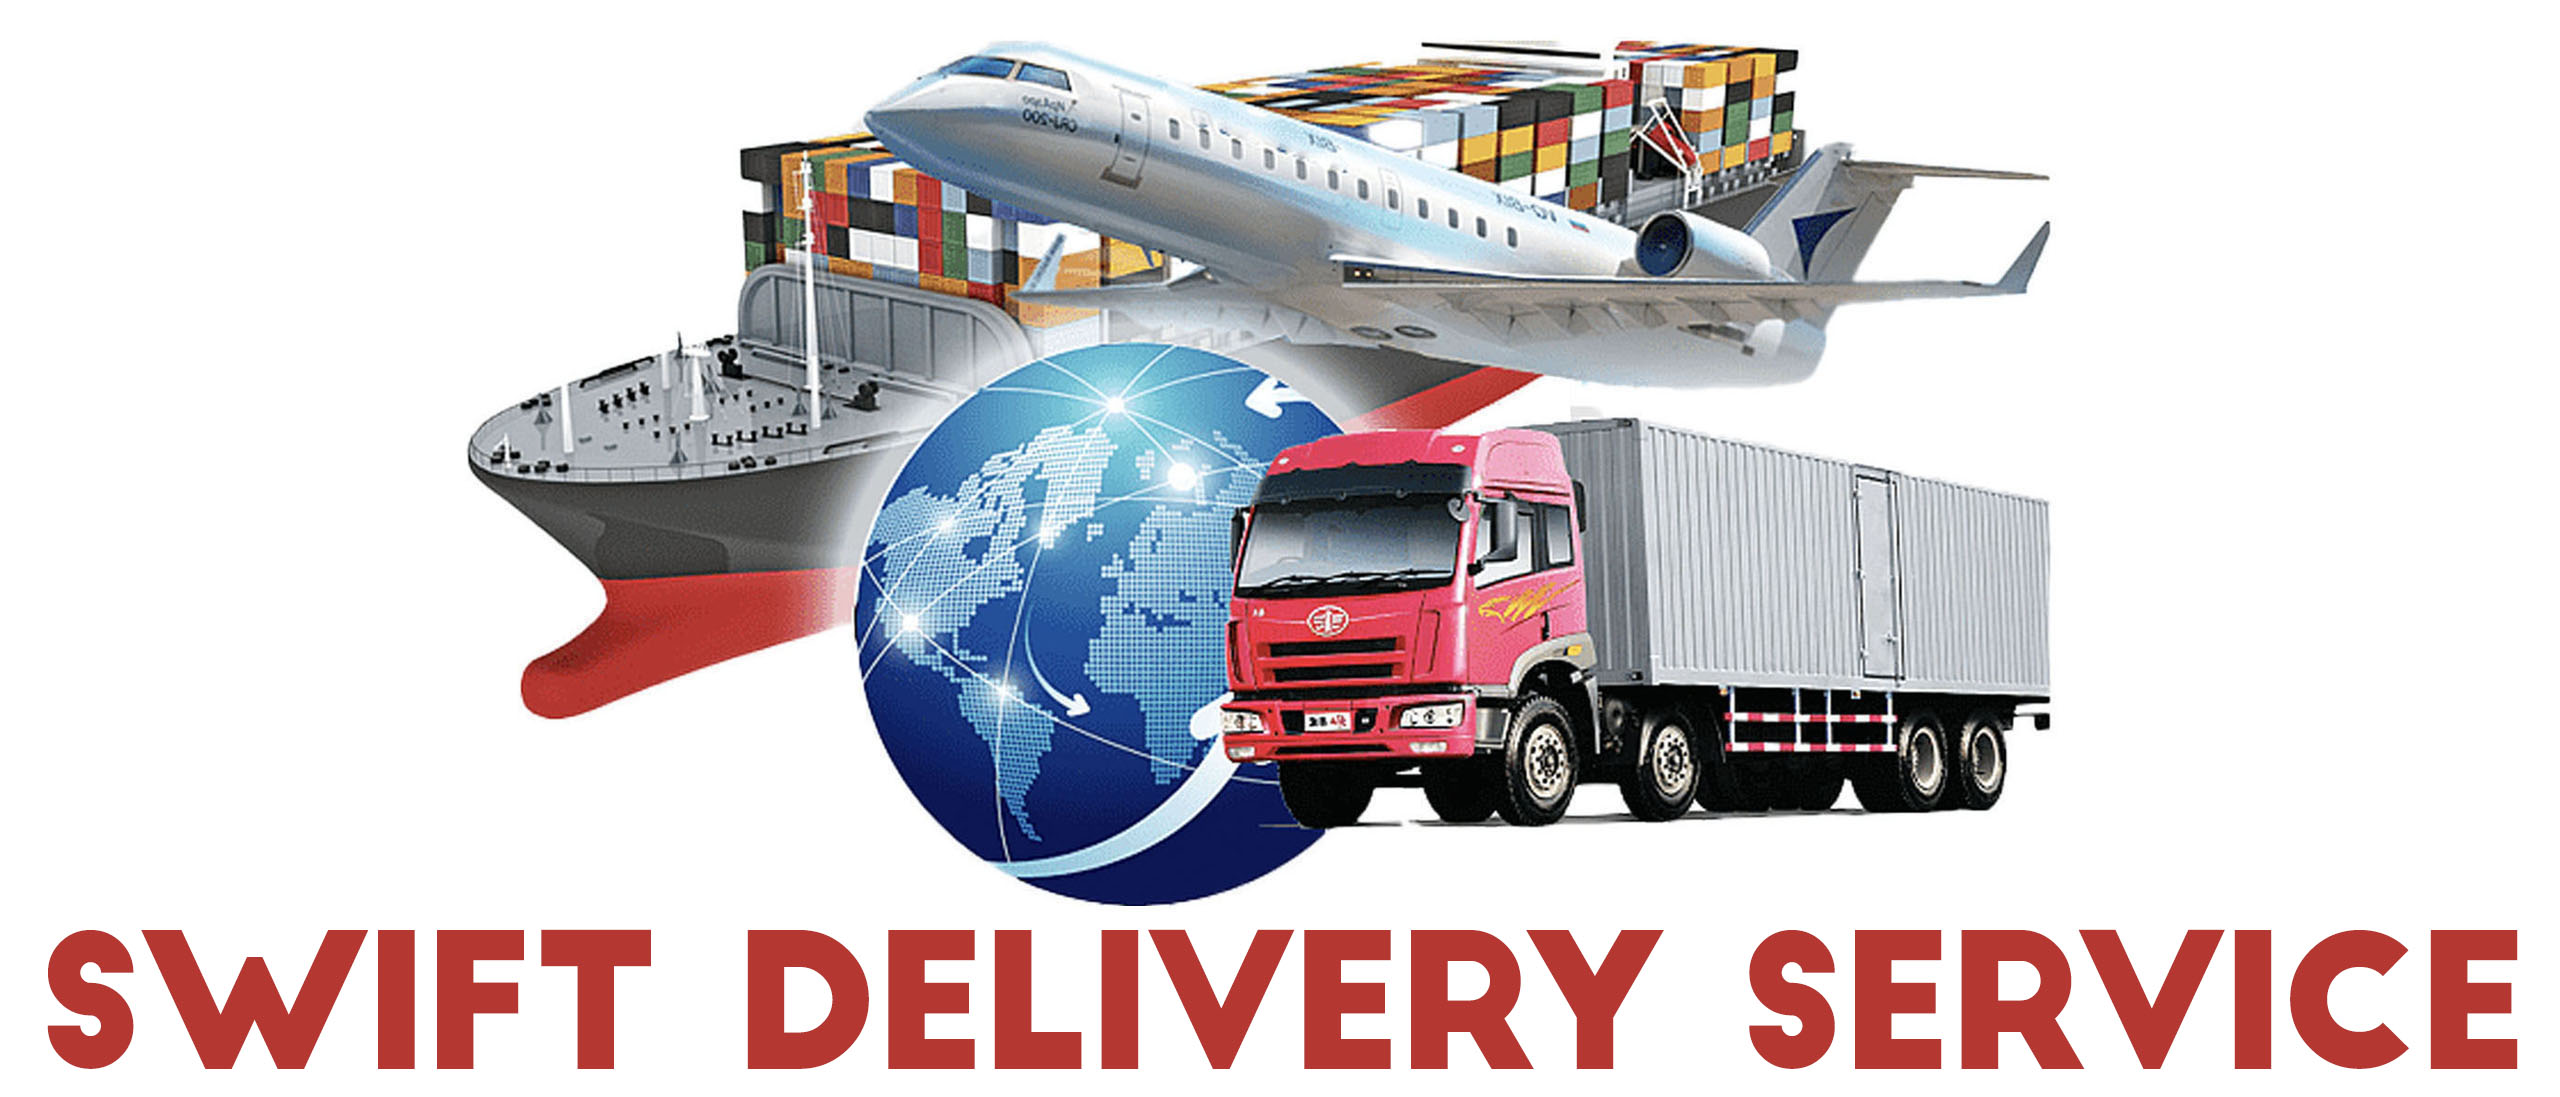 Courier Services - National Delivery Solutions